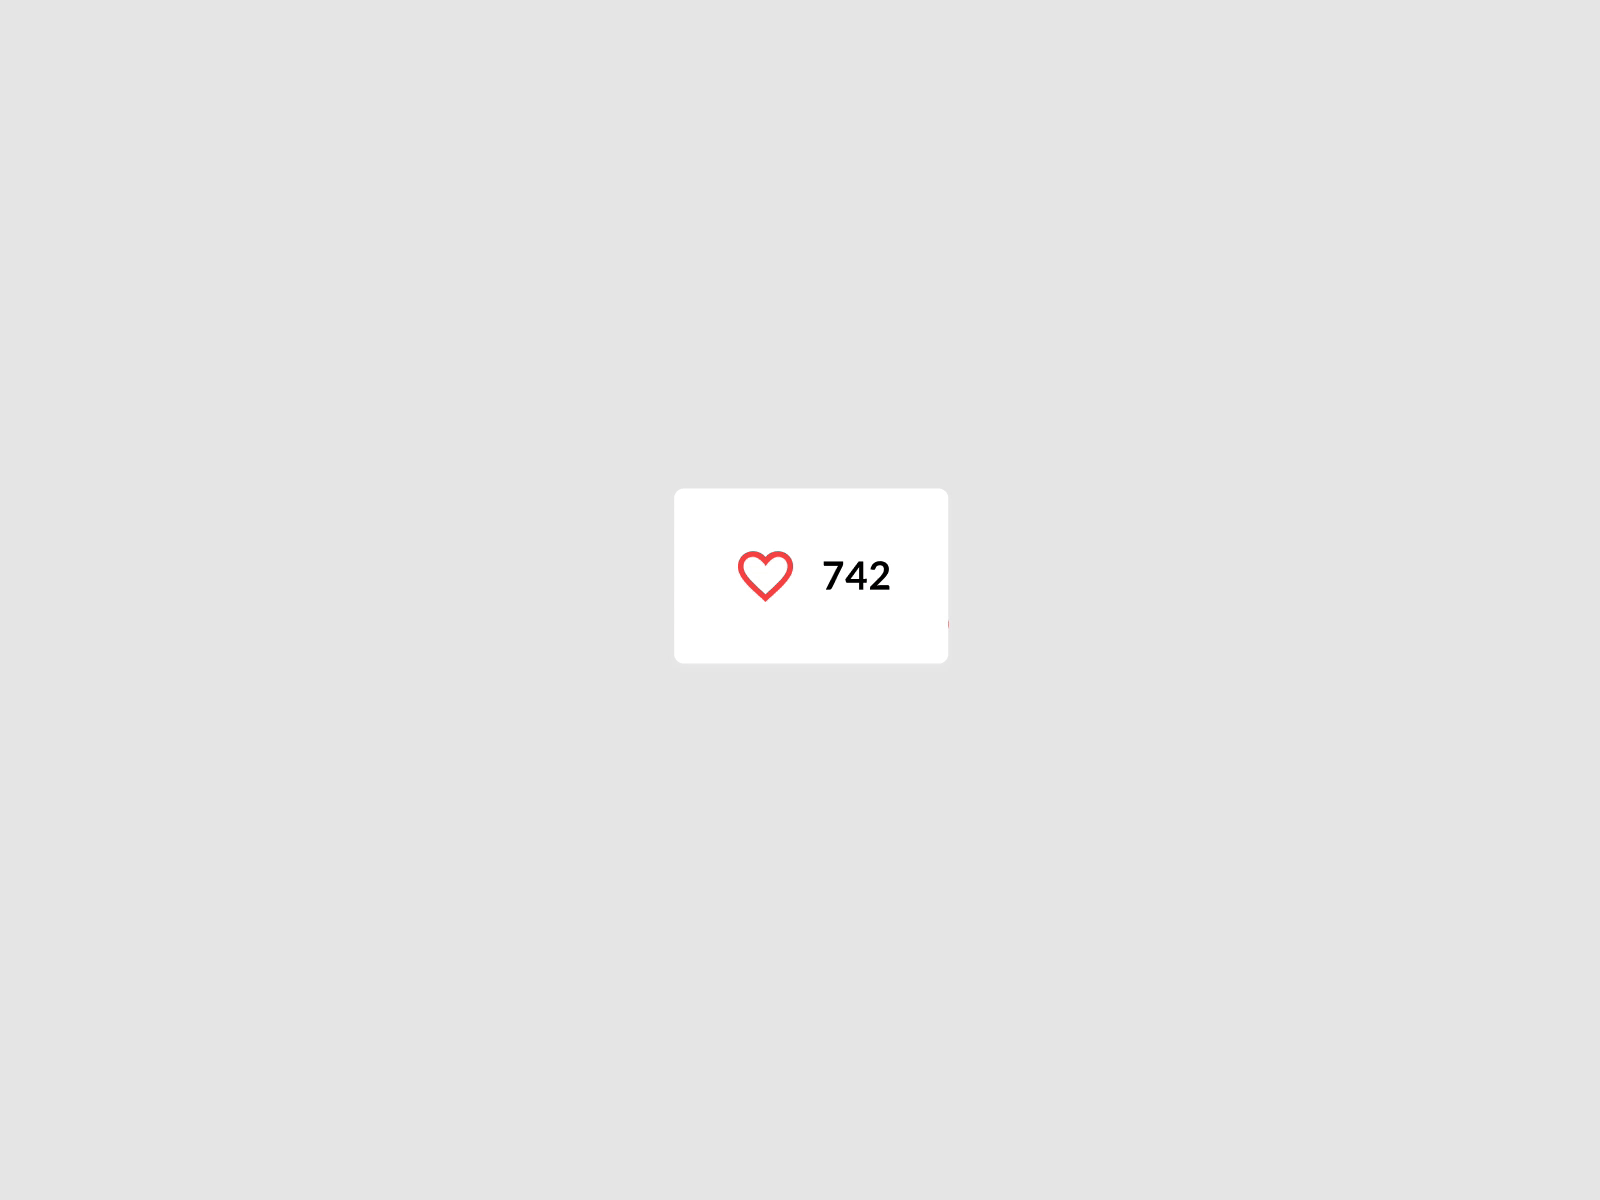 Favorite Button Animation ❤️ 2020 animation animation design button button animation button design button states design favorite icon interaction design like like button ui ui design ux vector